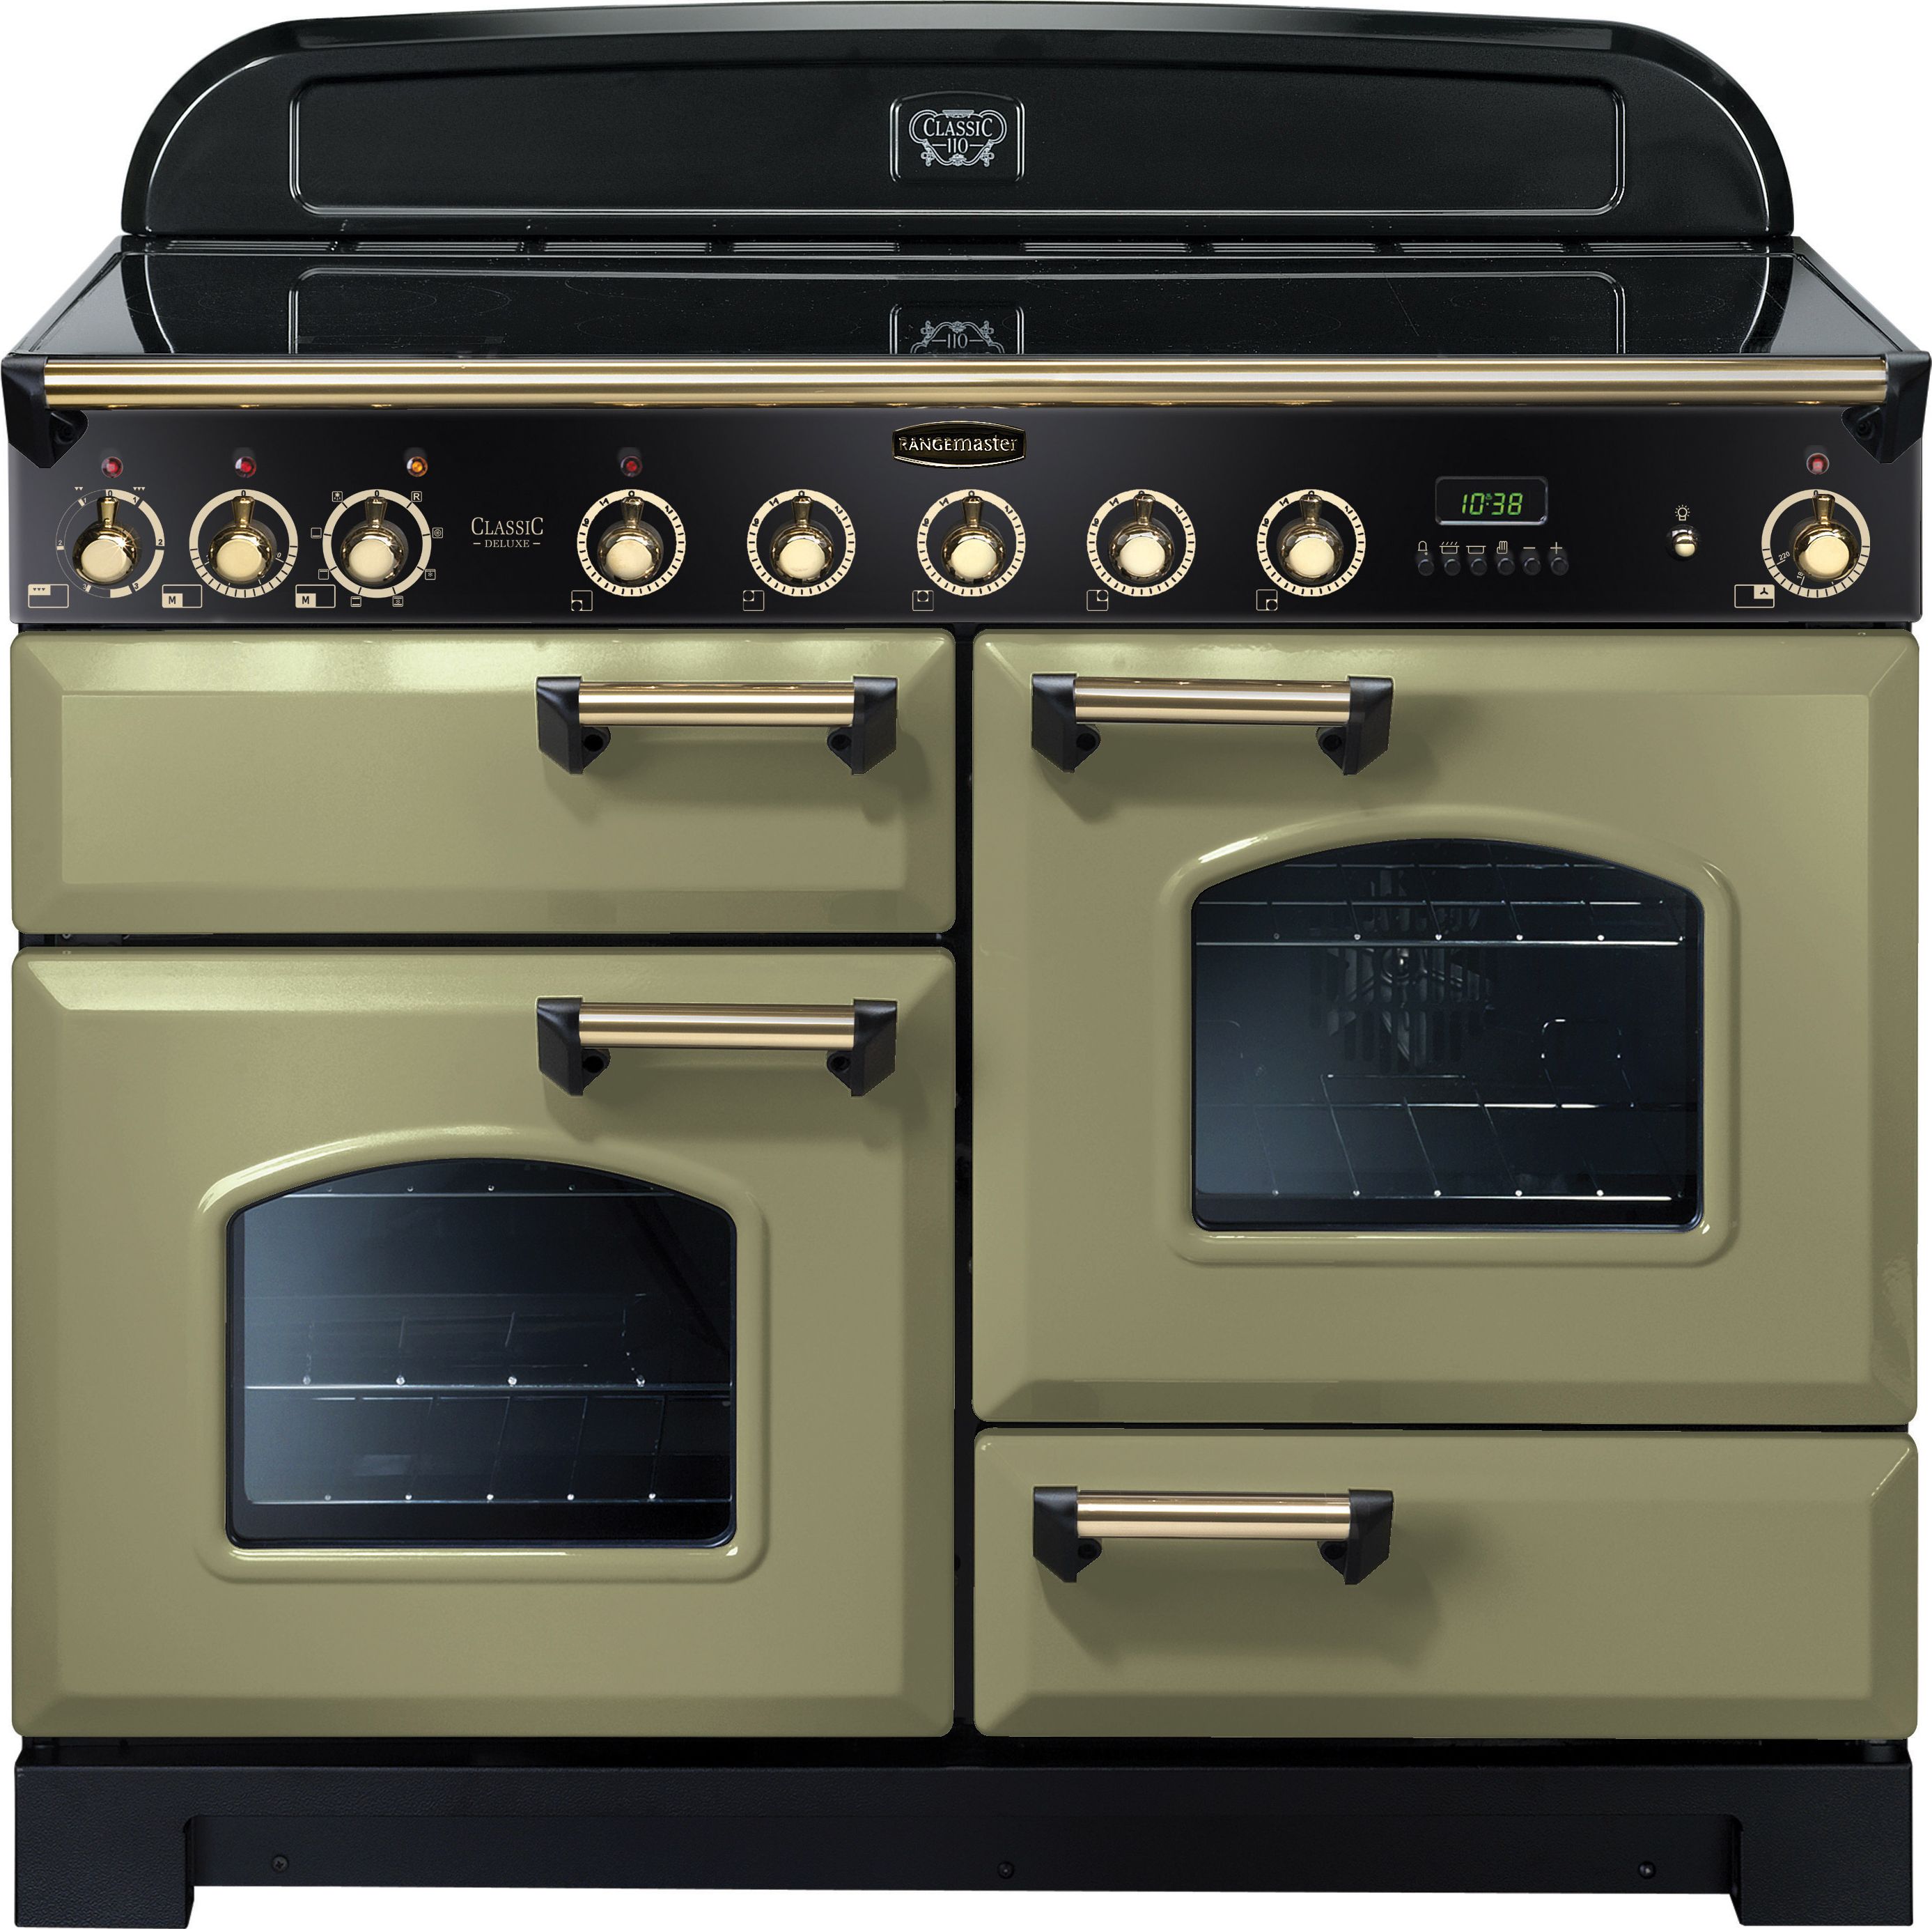 Rangemaster Classic Deluxe CDL110DFFOG/B 110cm Dual Fuel Range Cooker - Olive Green / Brass - A/A Rated, Green